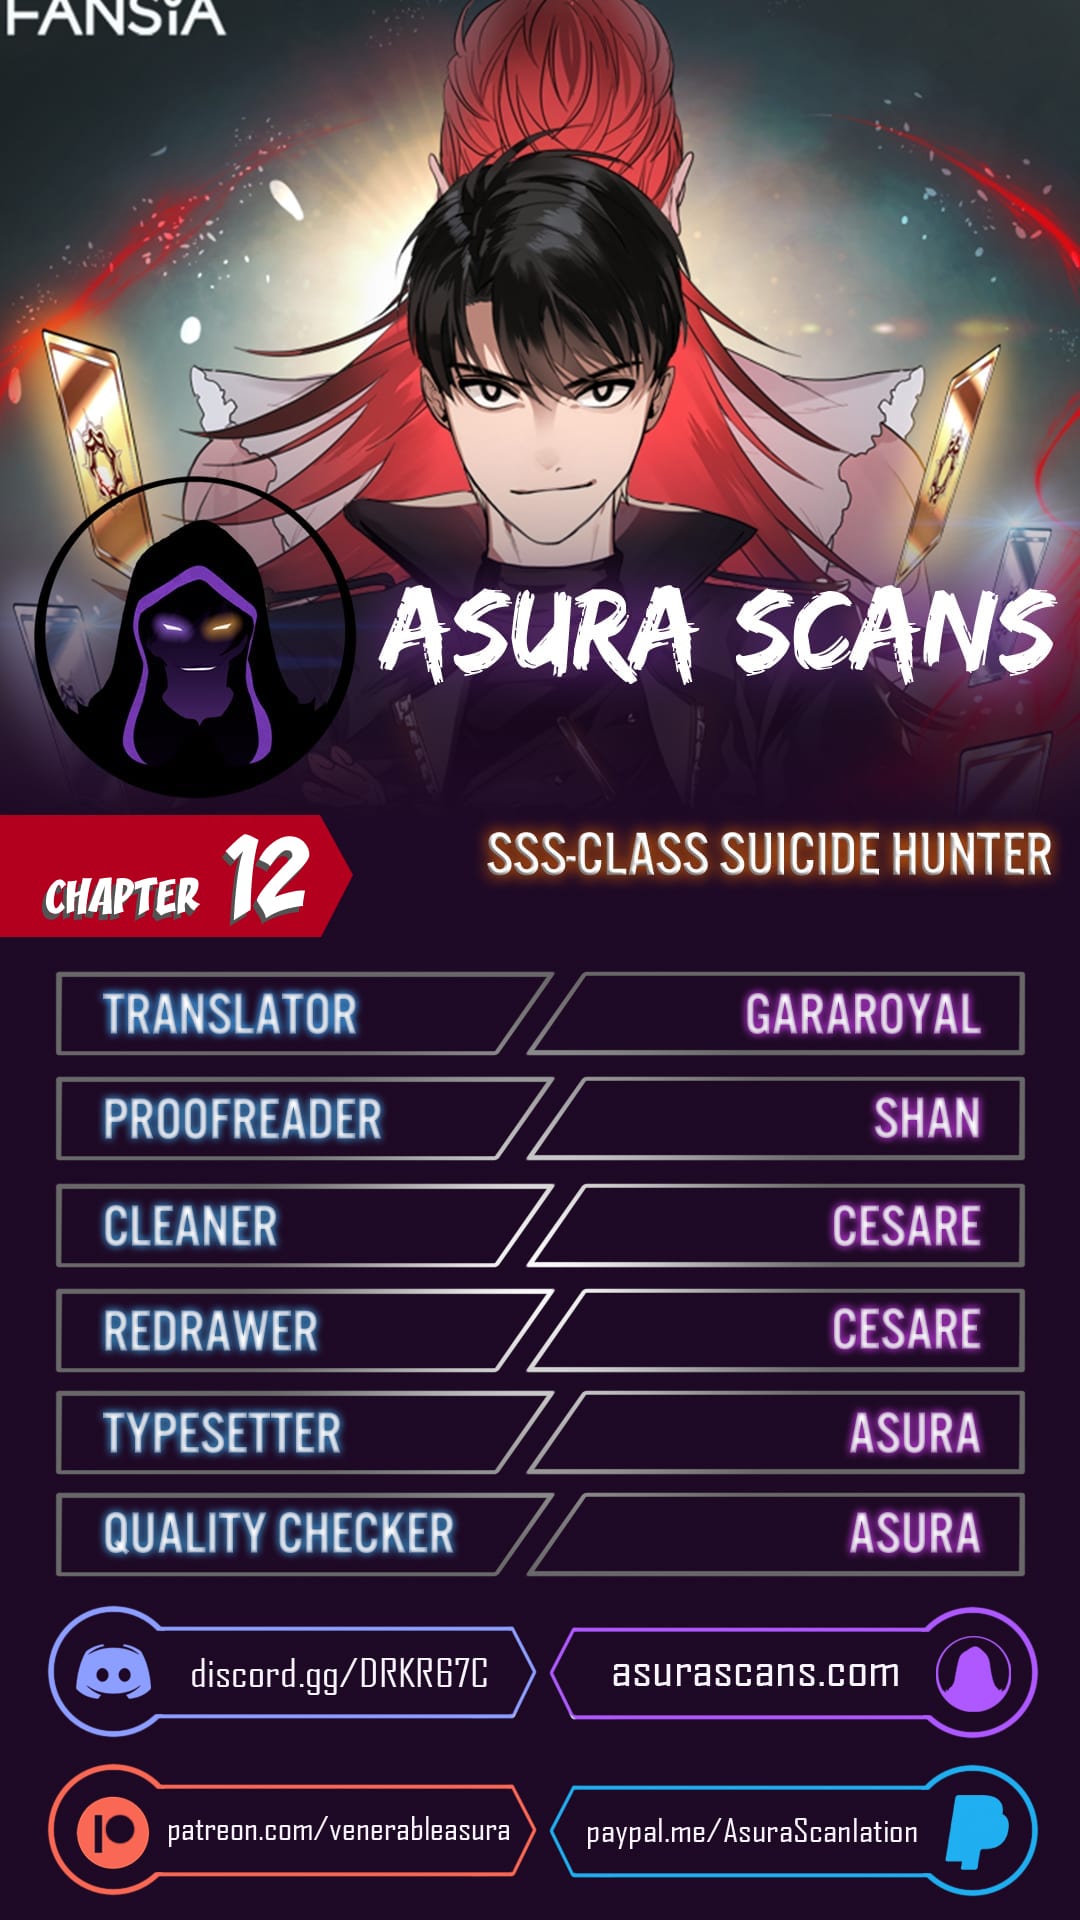 SSS-Class Suicide Hunter chapter 12